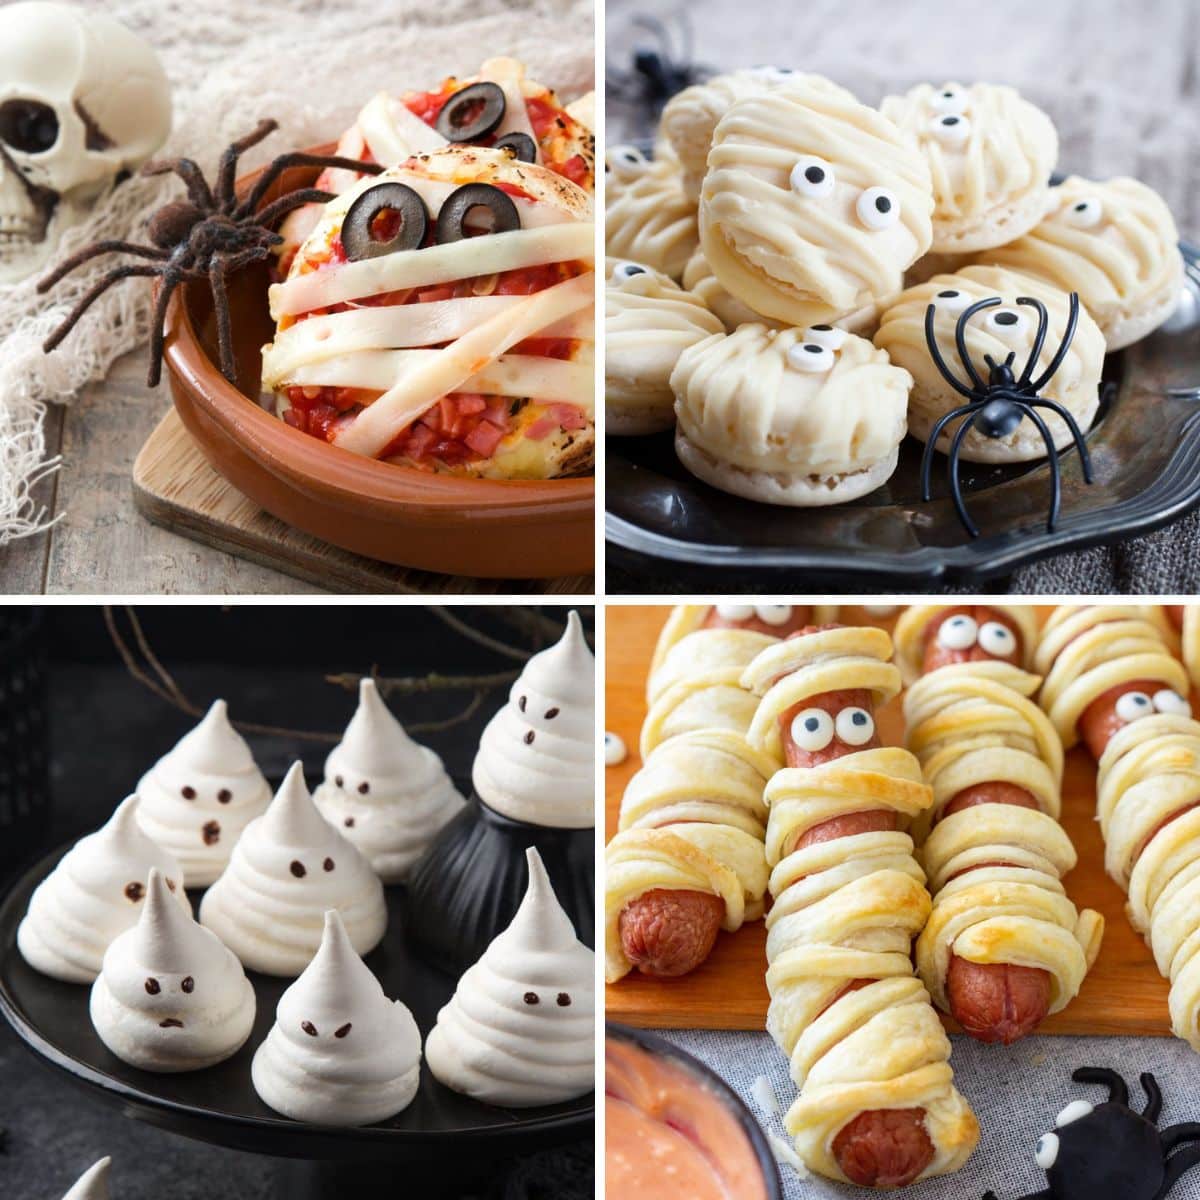 Best Halloween appetizers to make for parties featuring 4 images in a collage.